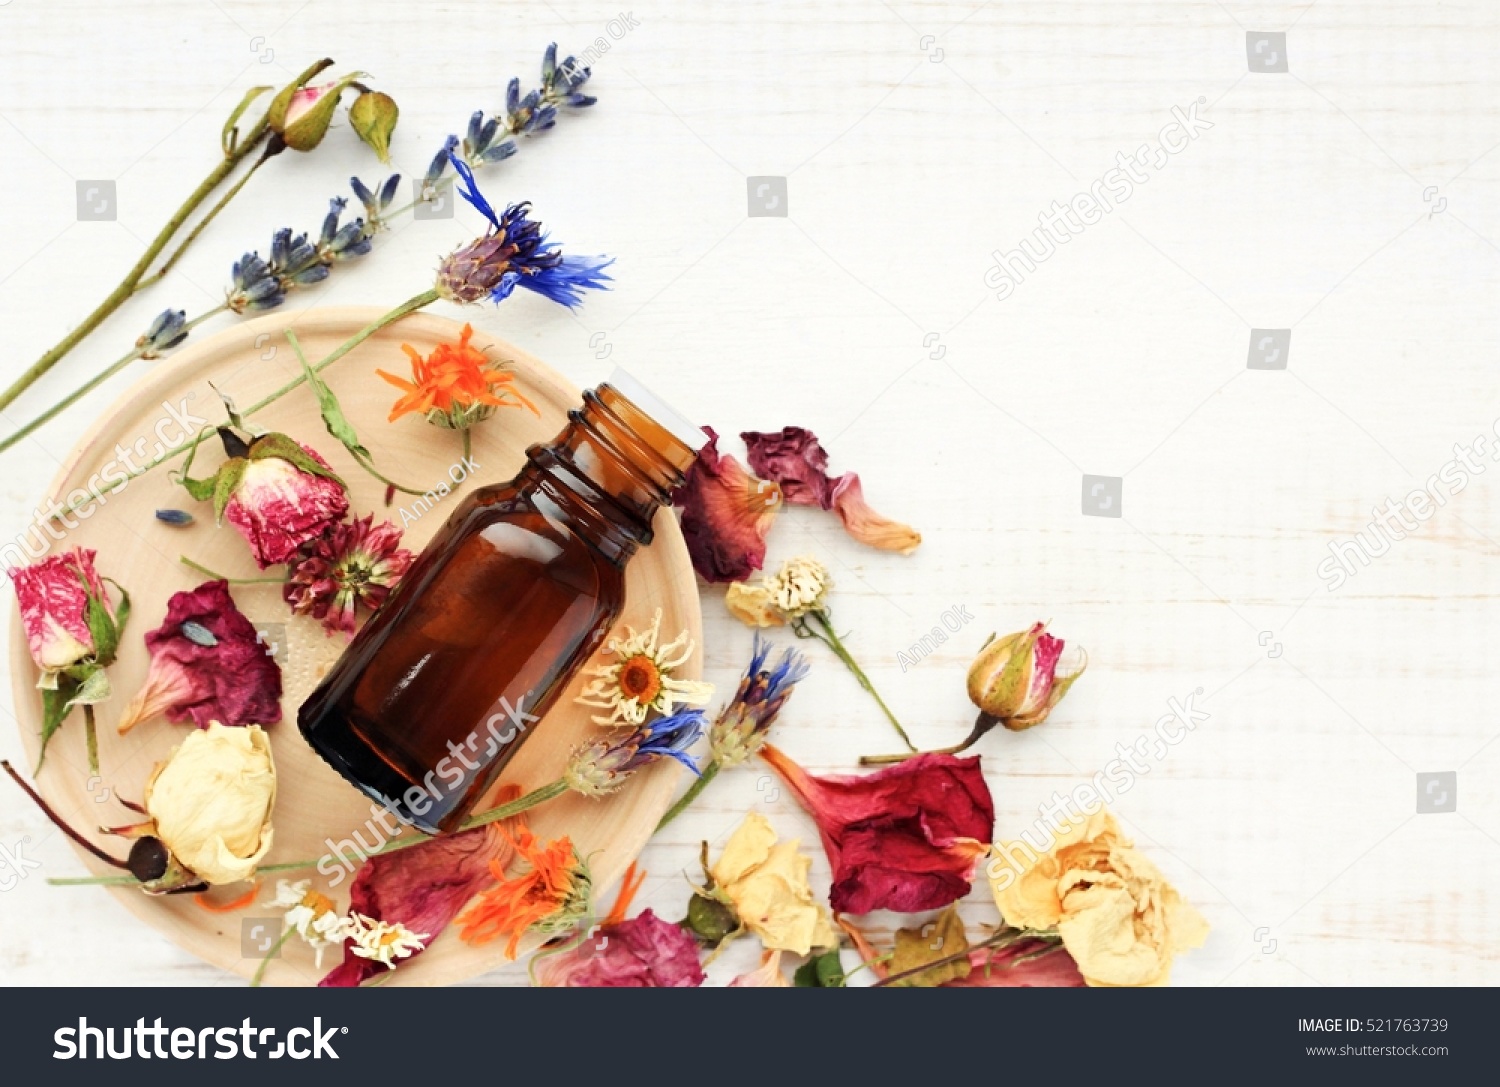 Various bright medicinal herb plant on wooden plate, essential oil extract bottle, top view. Botanical cosmetic ingredients, aromatherapy background. Herbal pharmacy #521763739